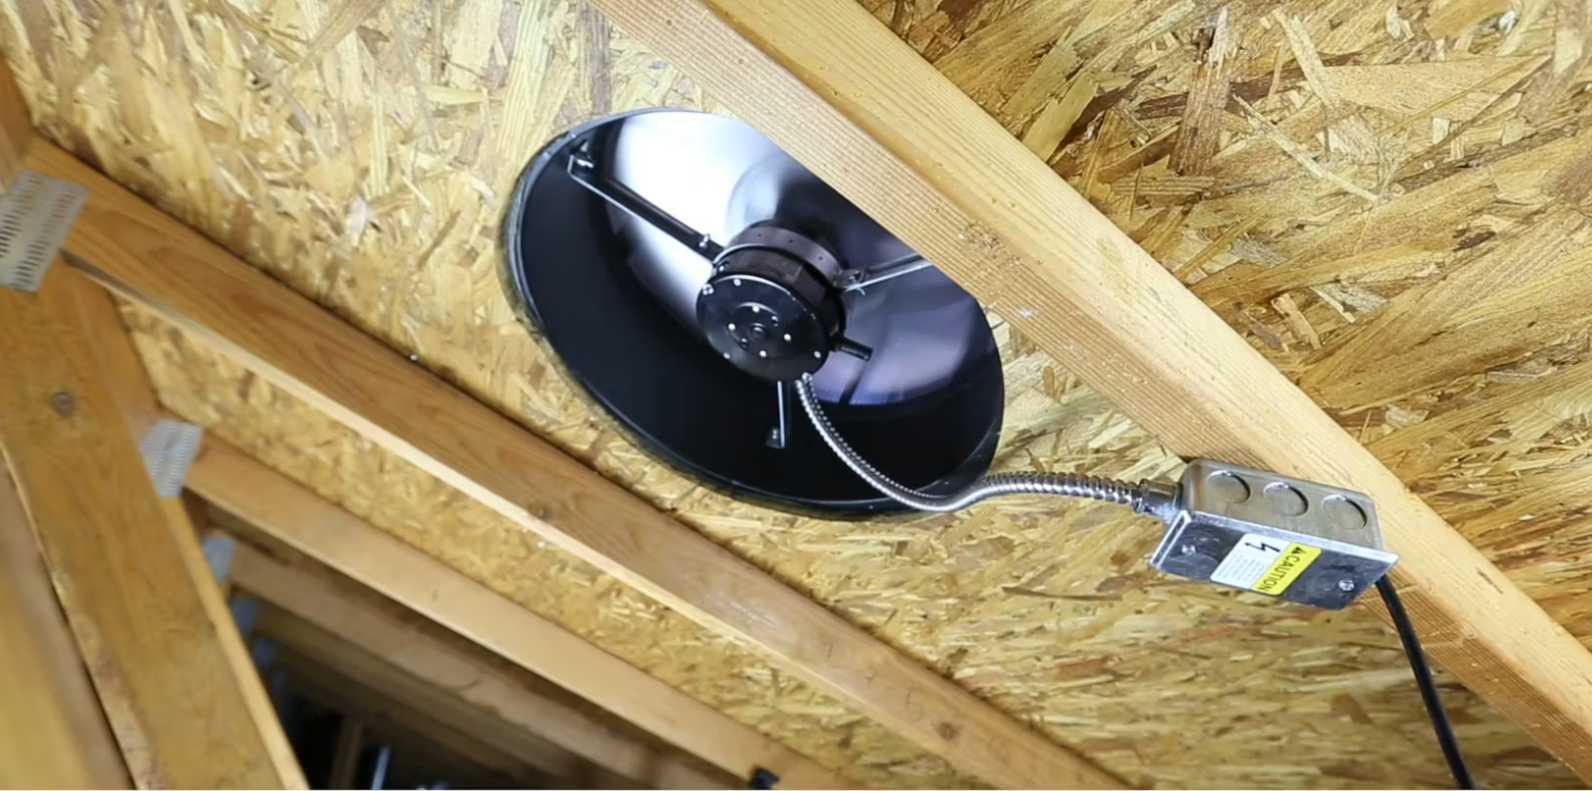 A fan is hanging from the ceiling of an attic.